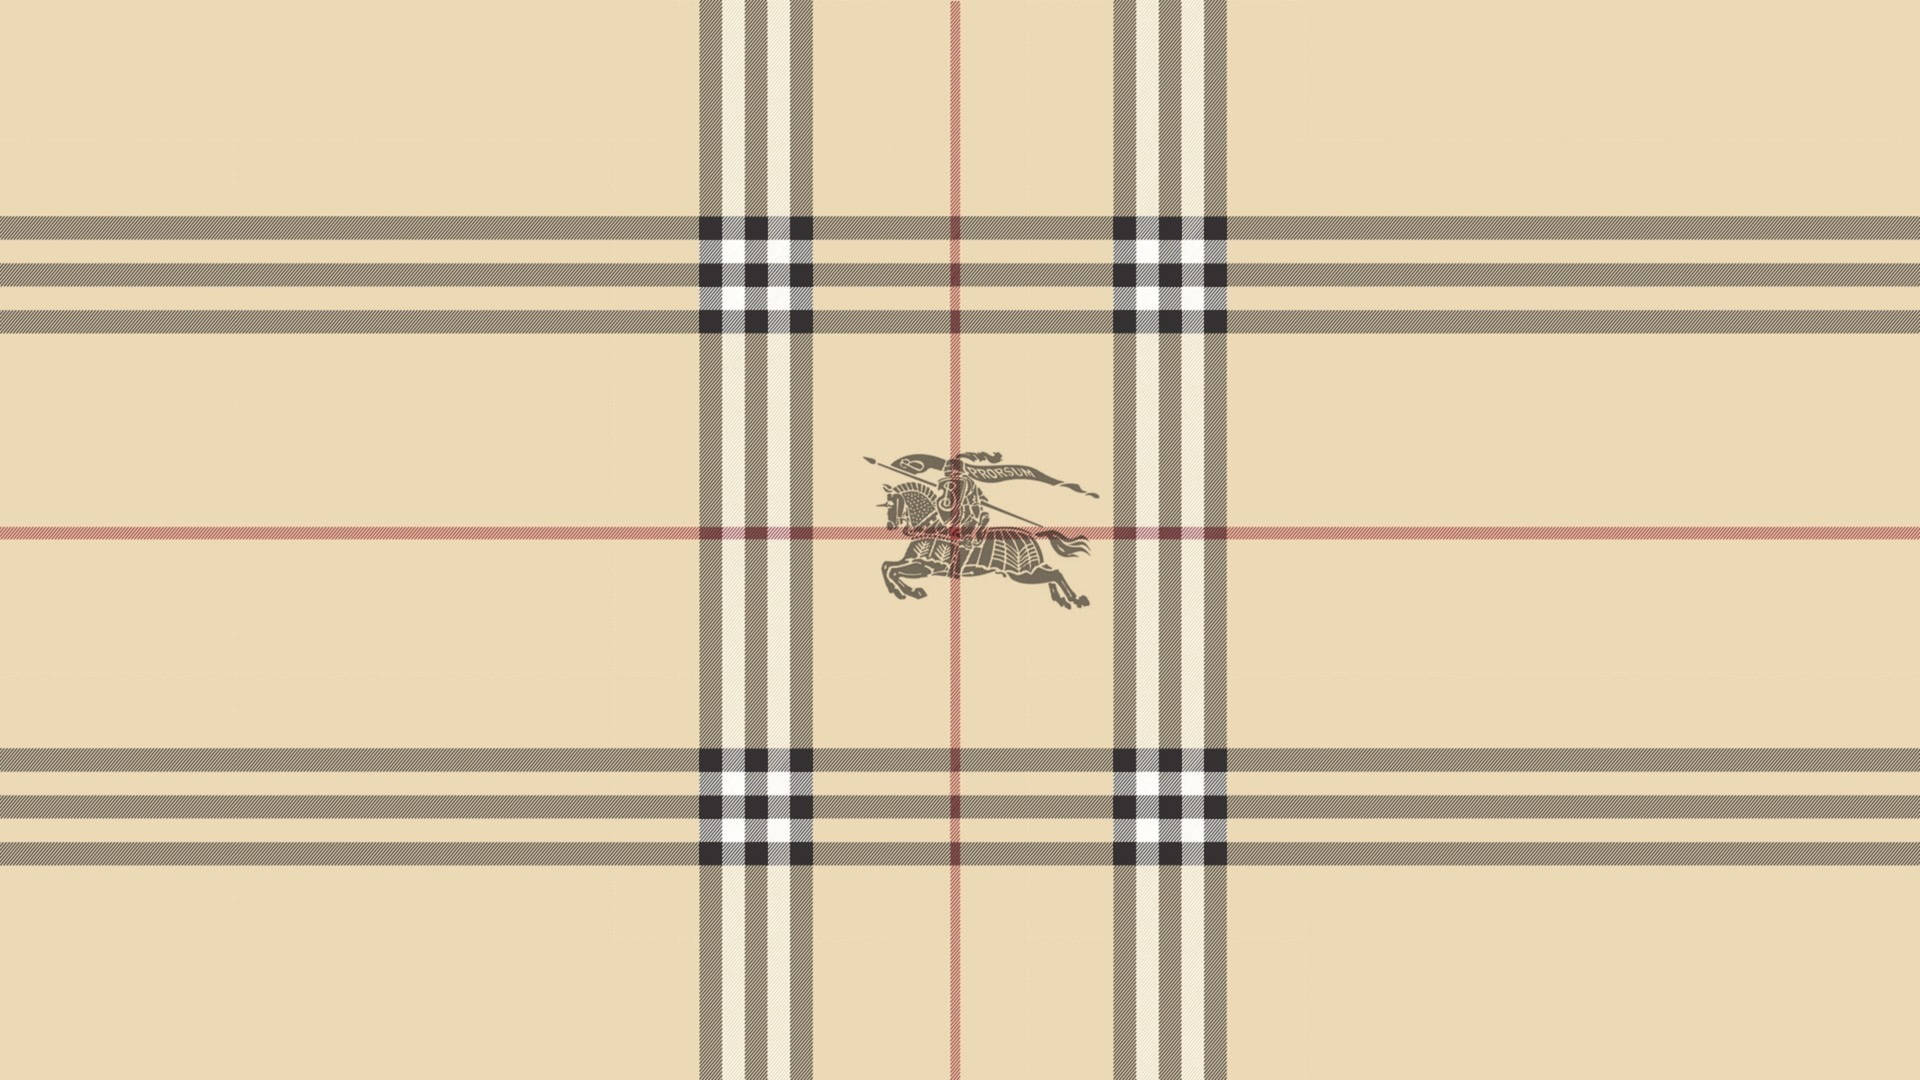 Free Burberry Wallpaper Downloads, [100+] Burberry Wallpapers for FREE |  